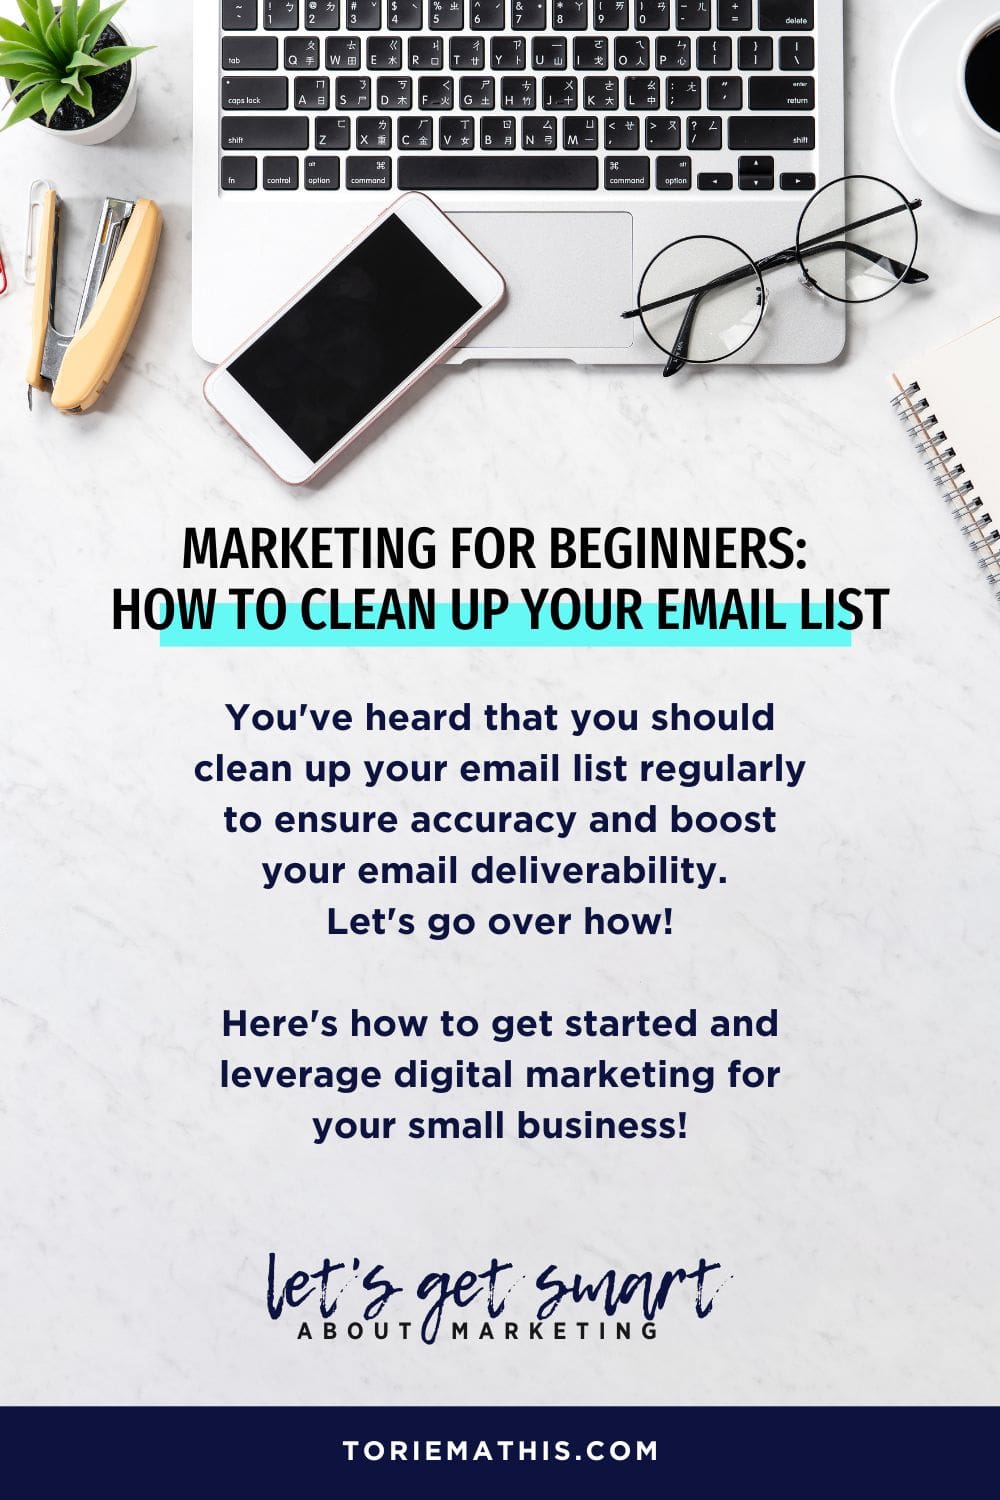 Easy Ways to Clean Up Your Email List